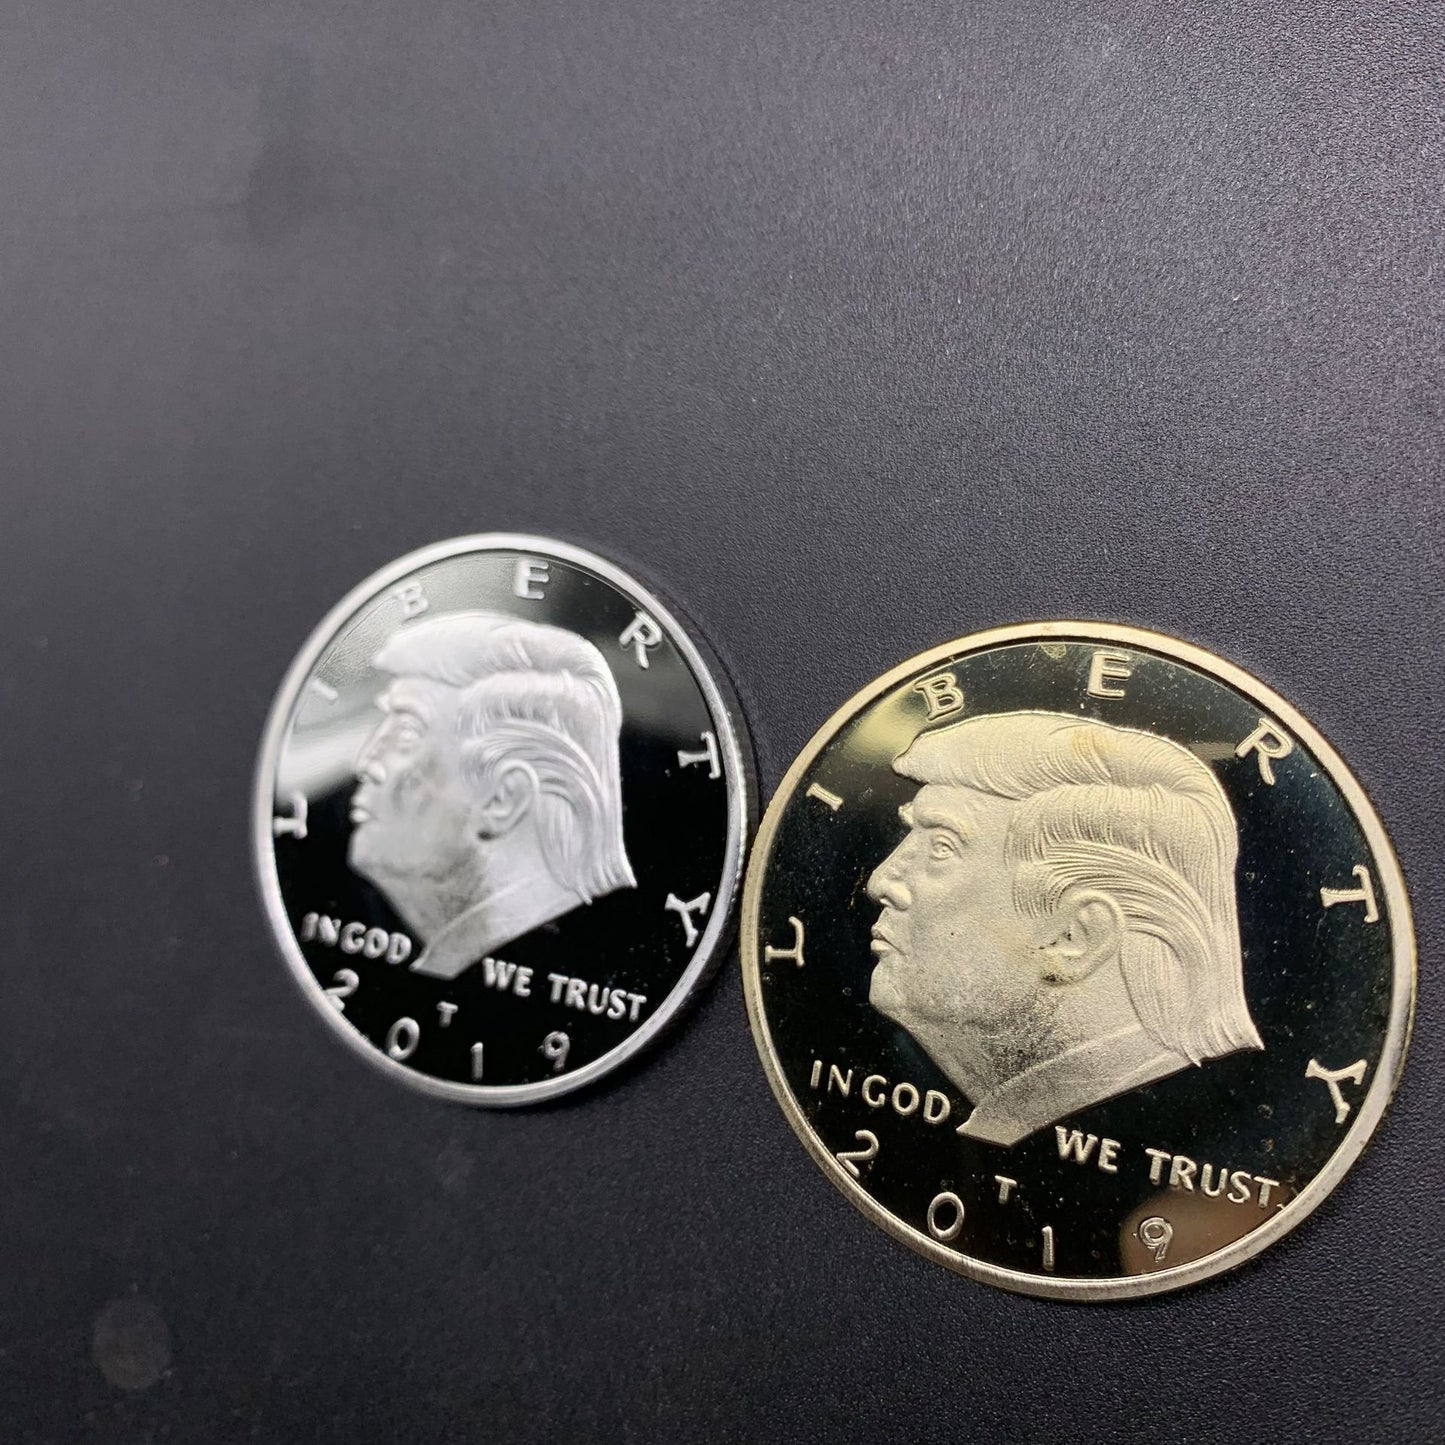 Electroplating commemorative coins